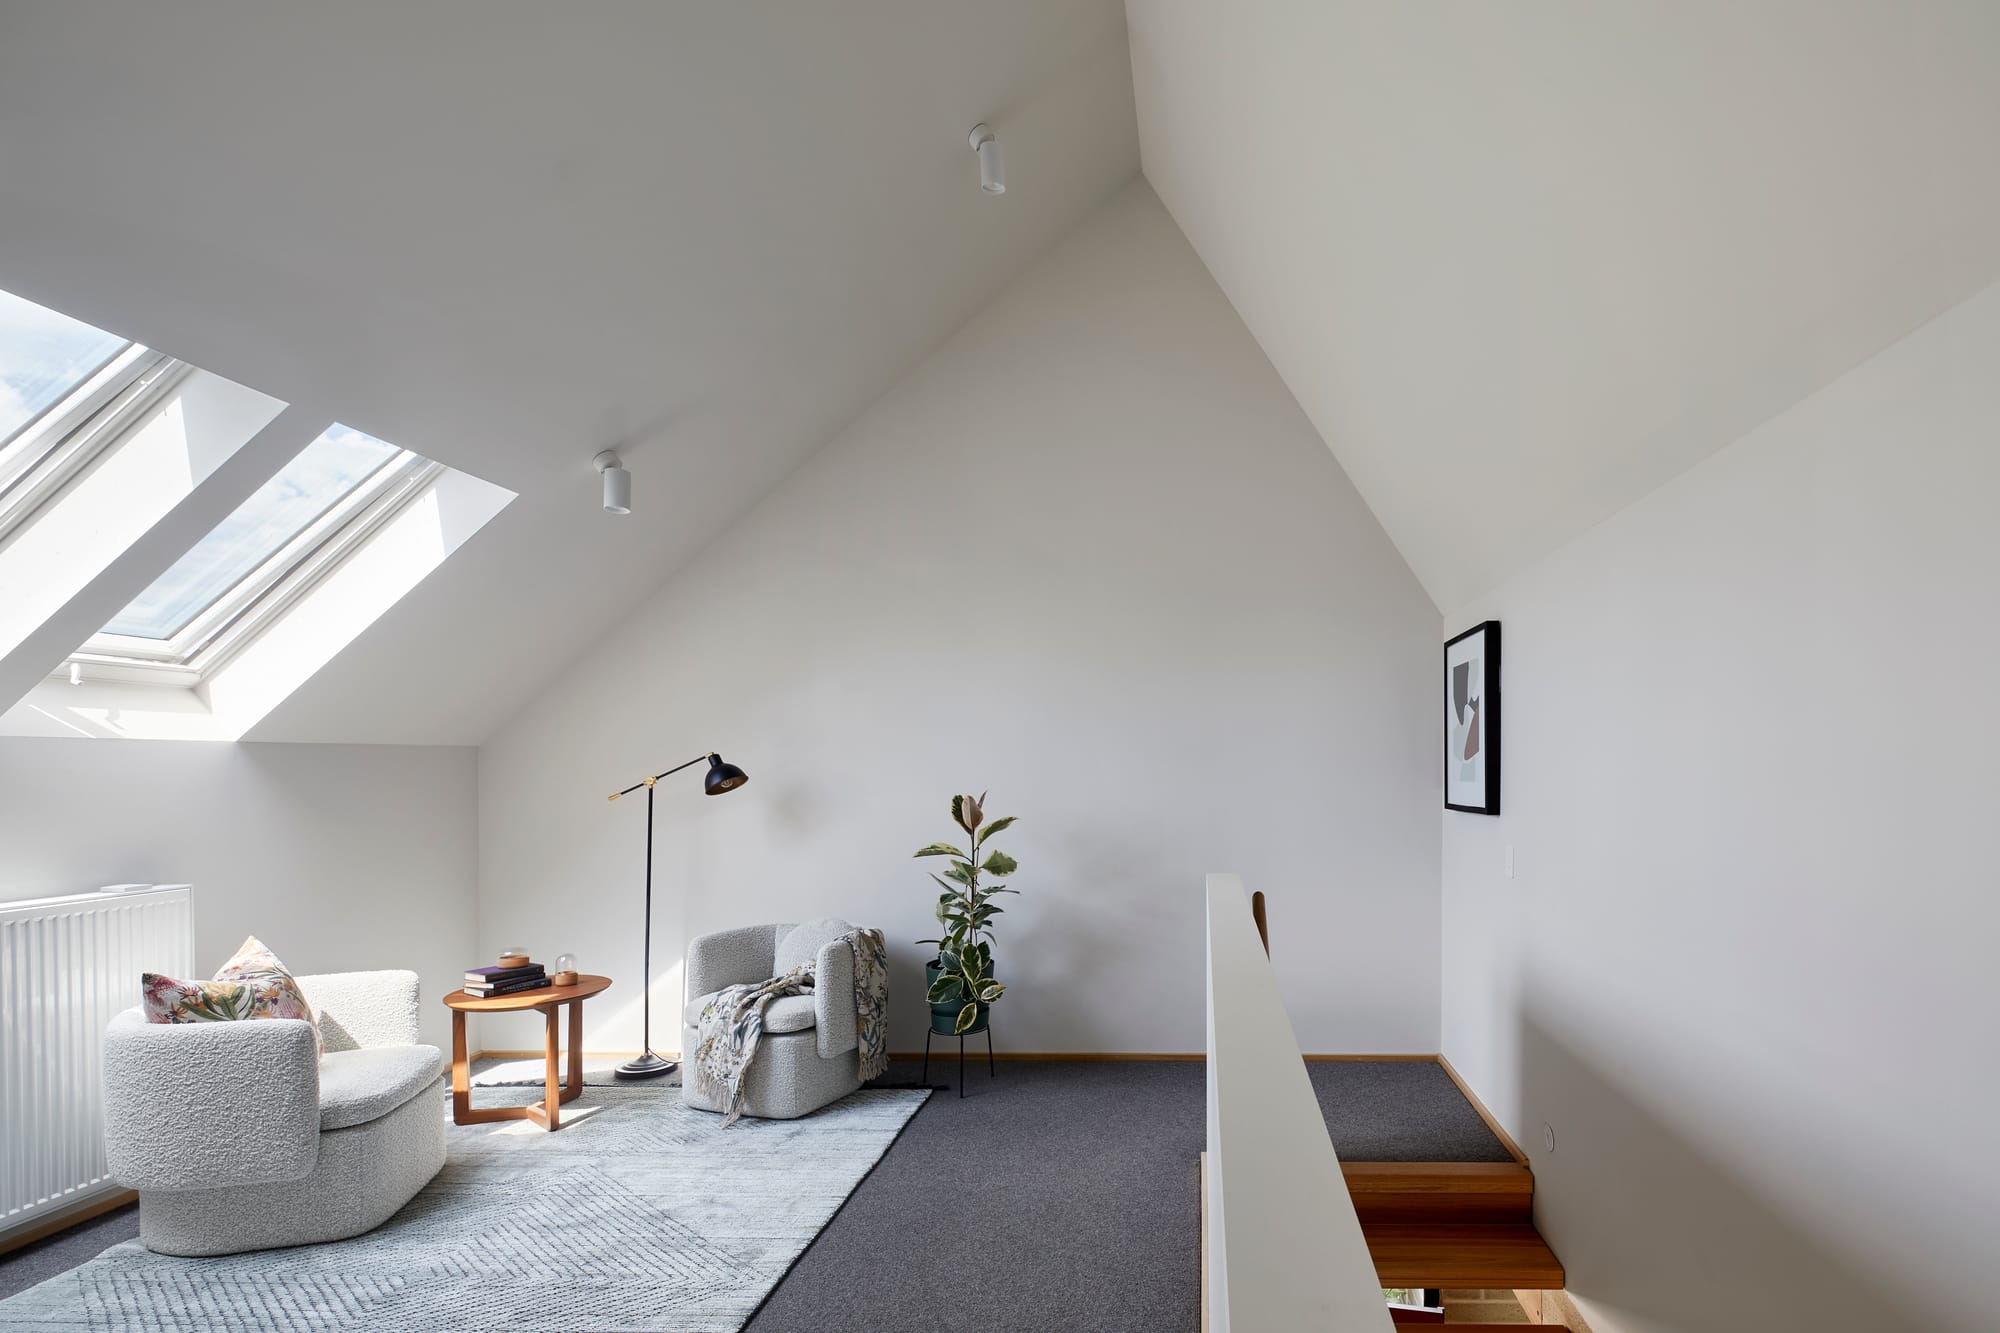 An interior view of the loft space with white plasterboard walls and high ceilings